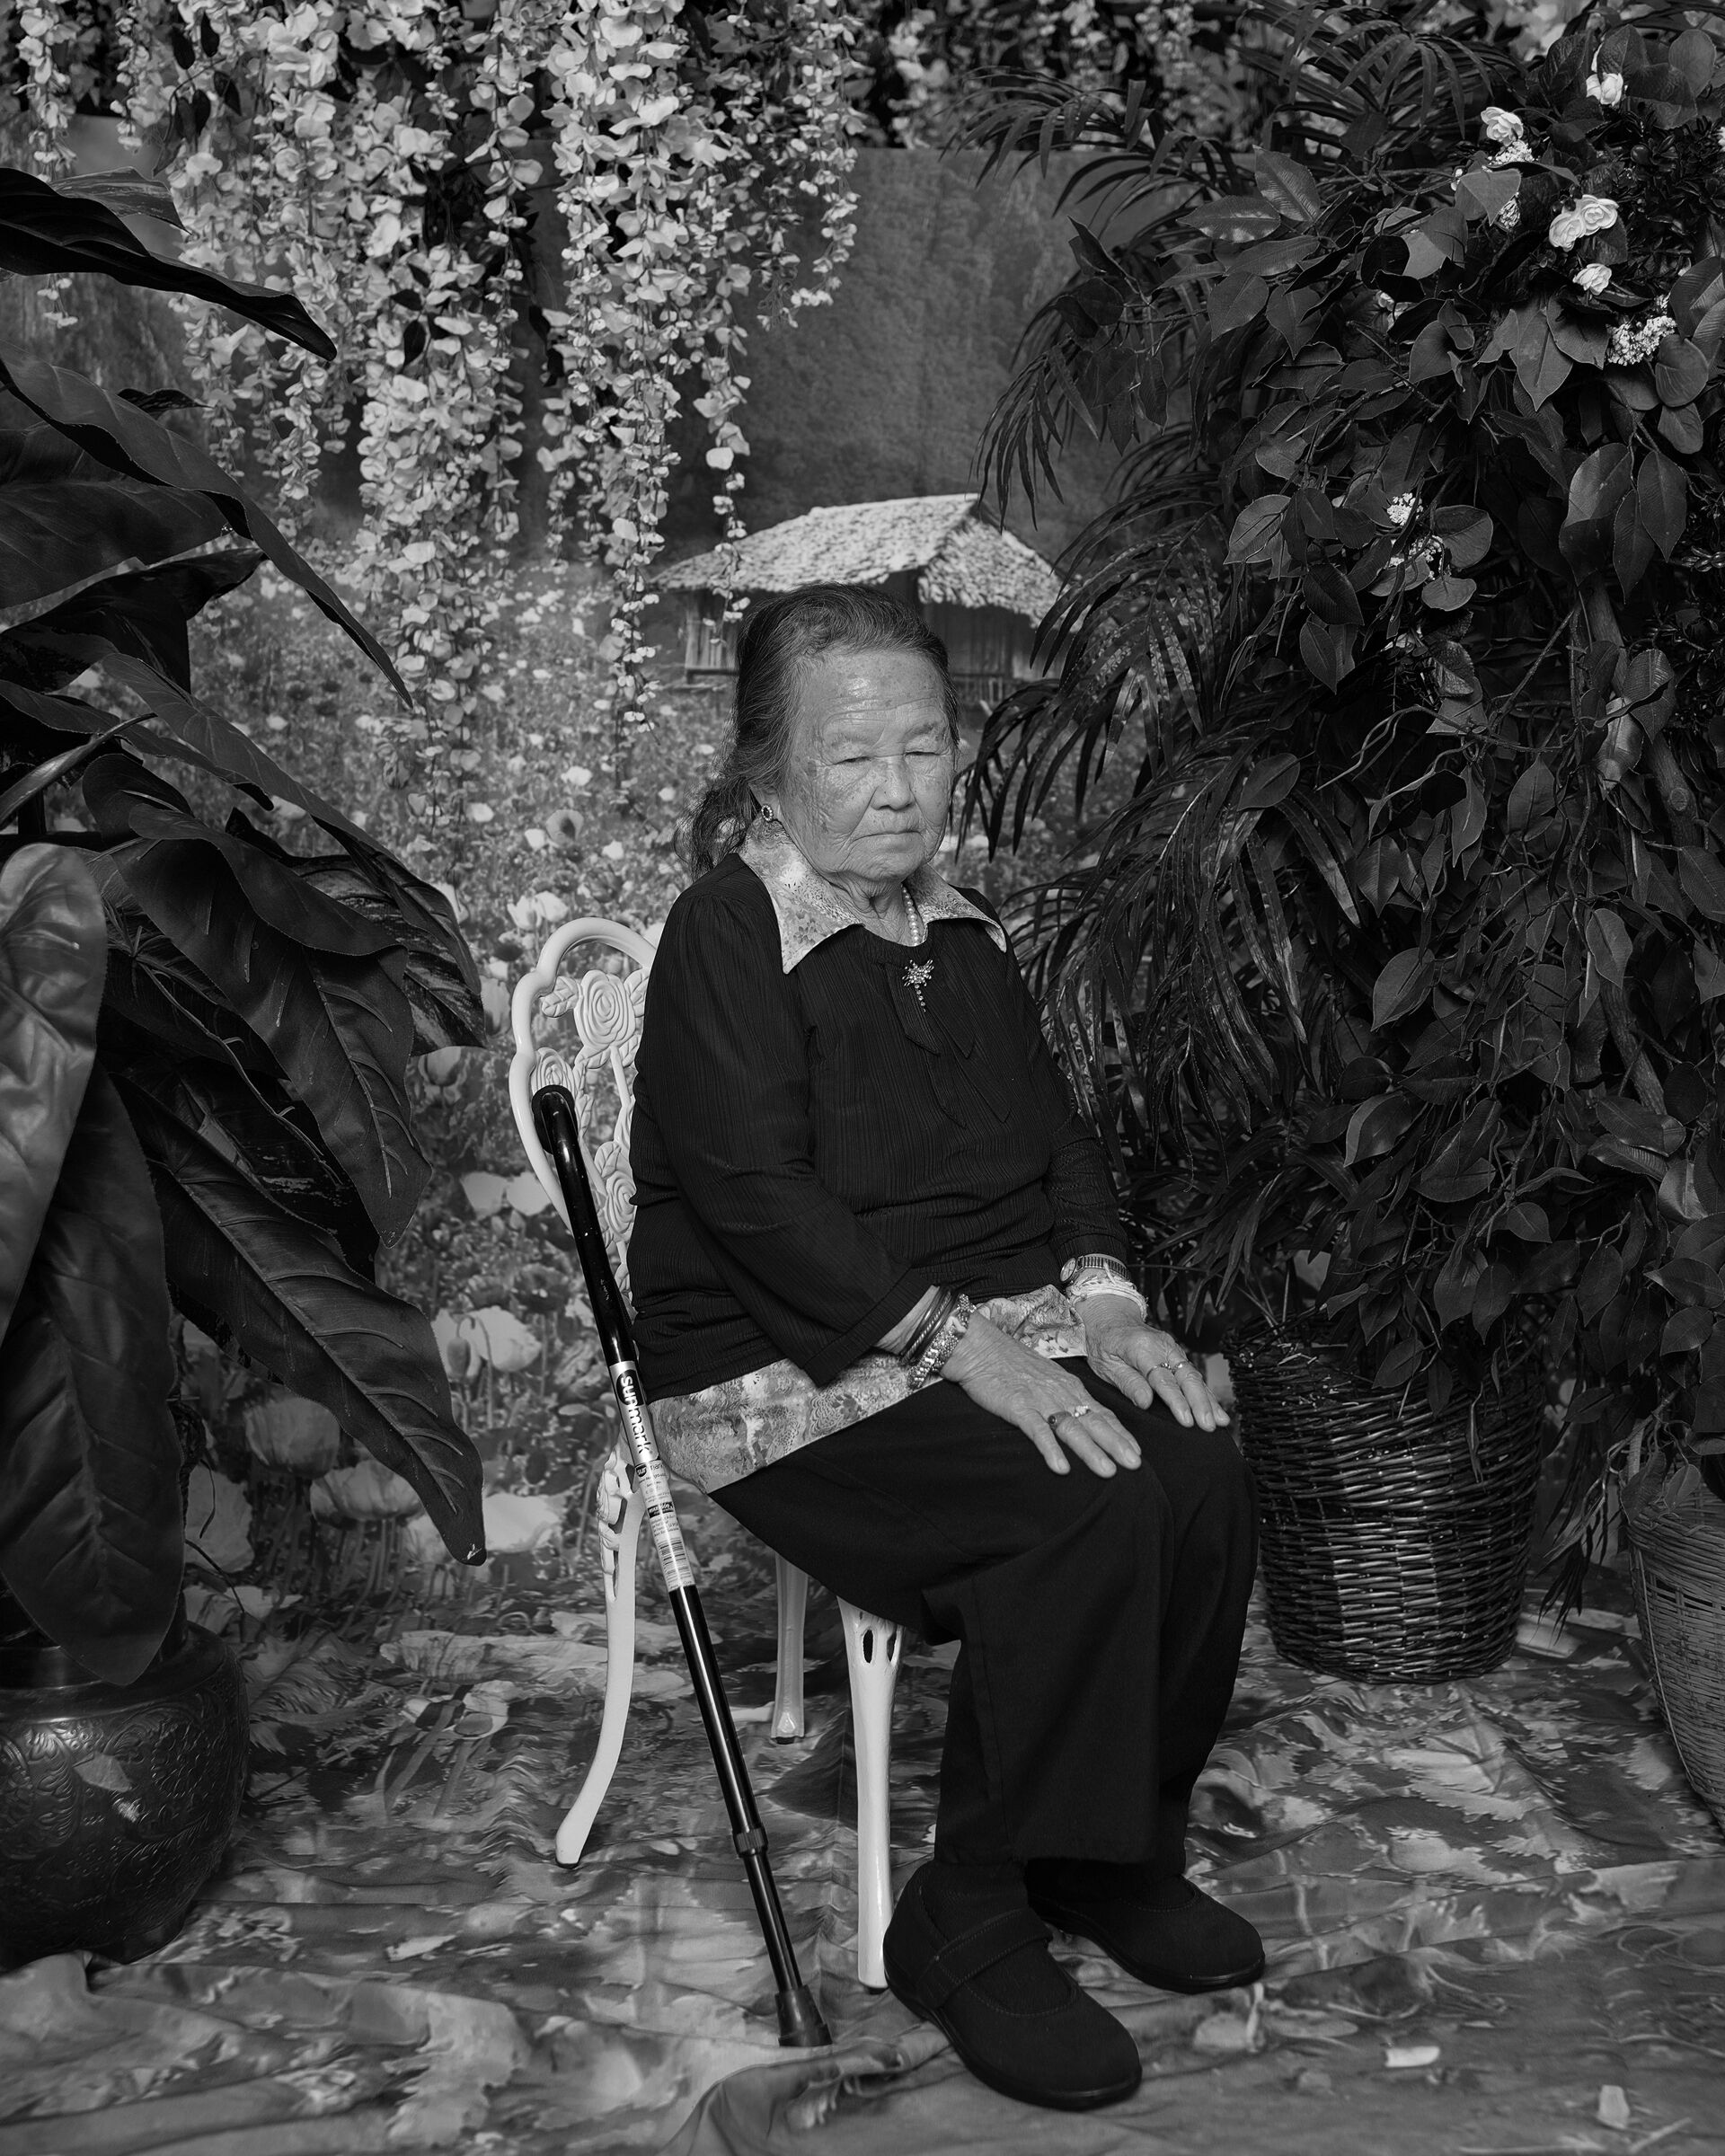 A sitting woman surrounded by plants.